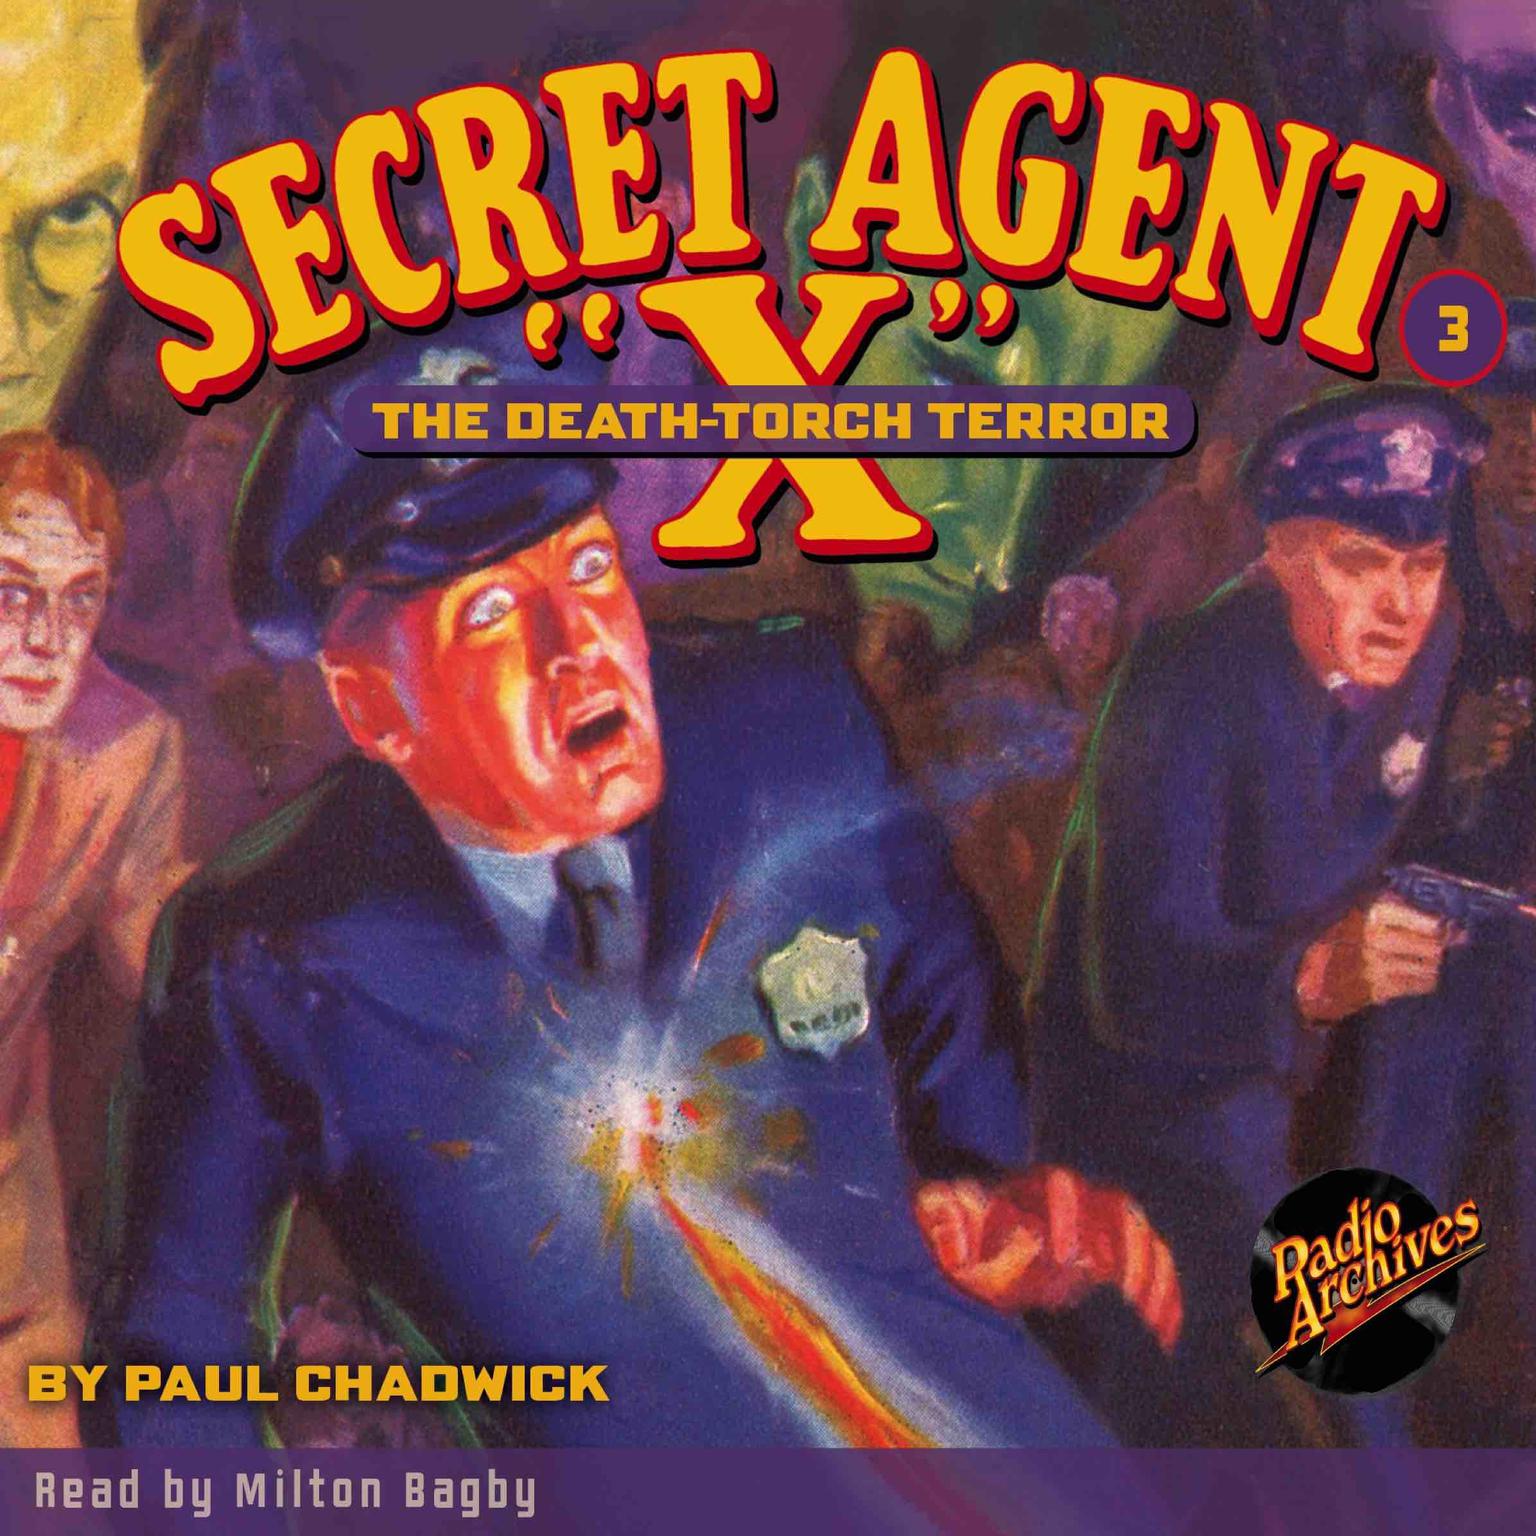 Secret Agent X: The Death-Torch Terror Audiobook, by Paul Chadwick